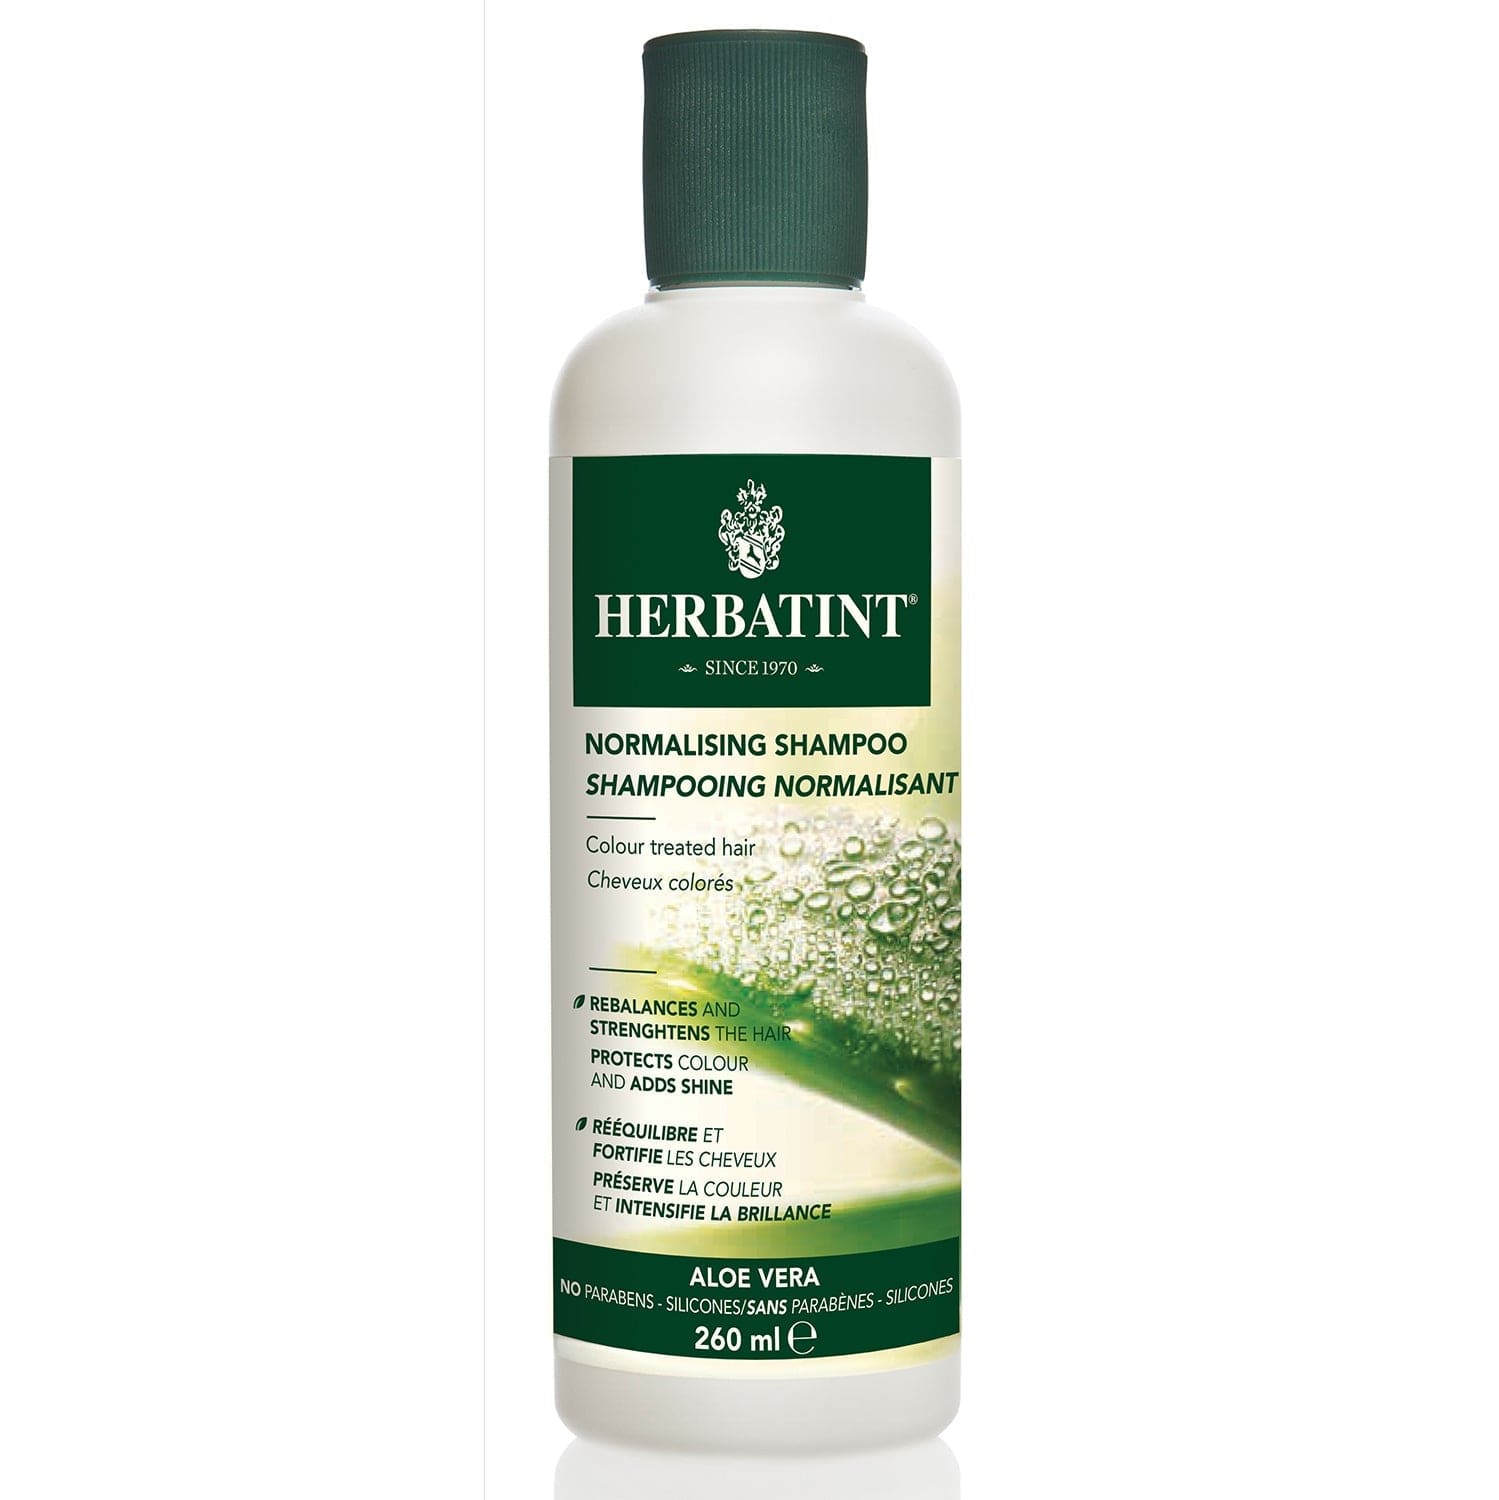 HERBATINT Soins & beauté Shampooing normalisant 260ml